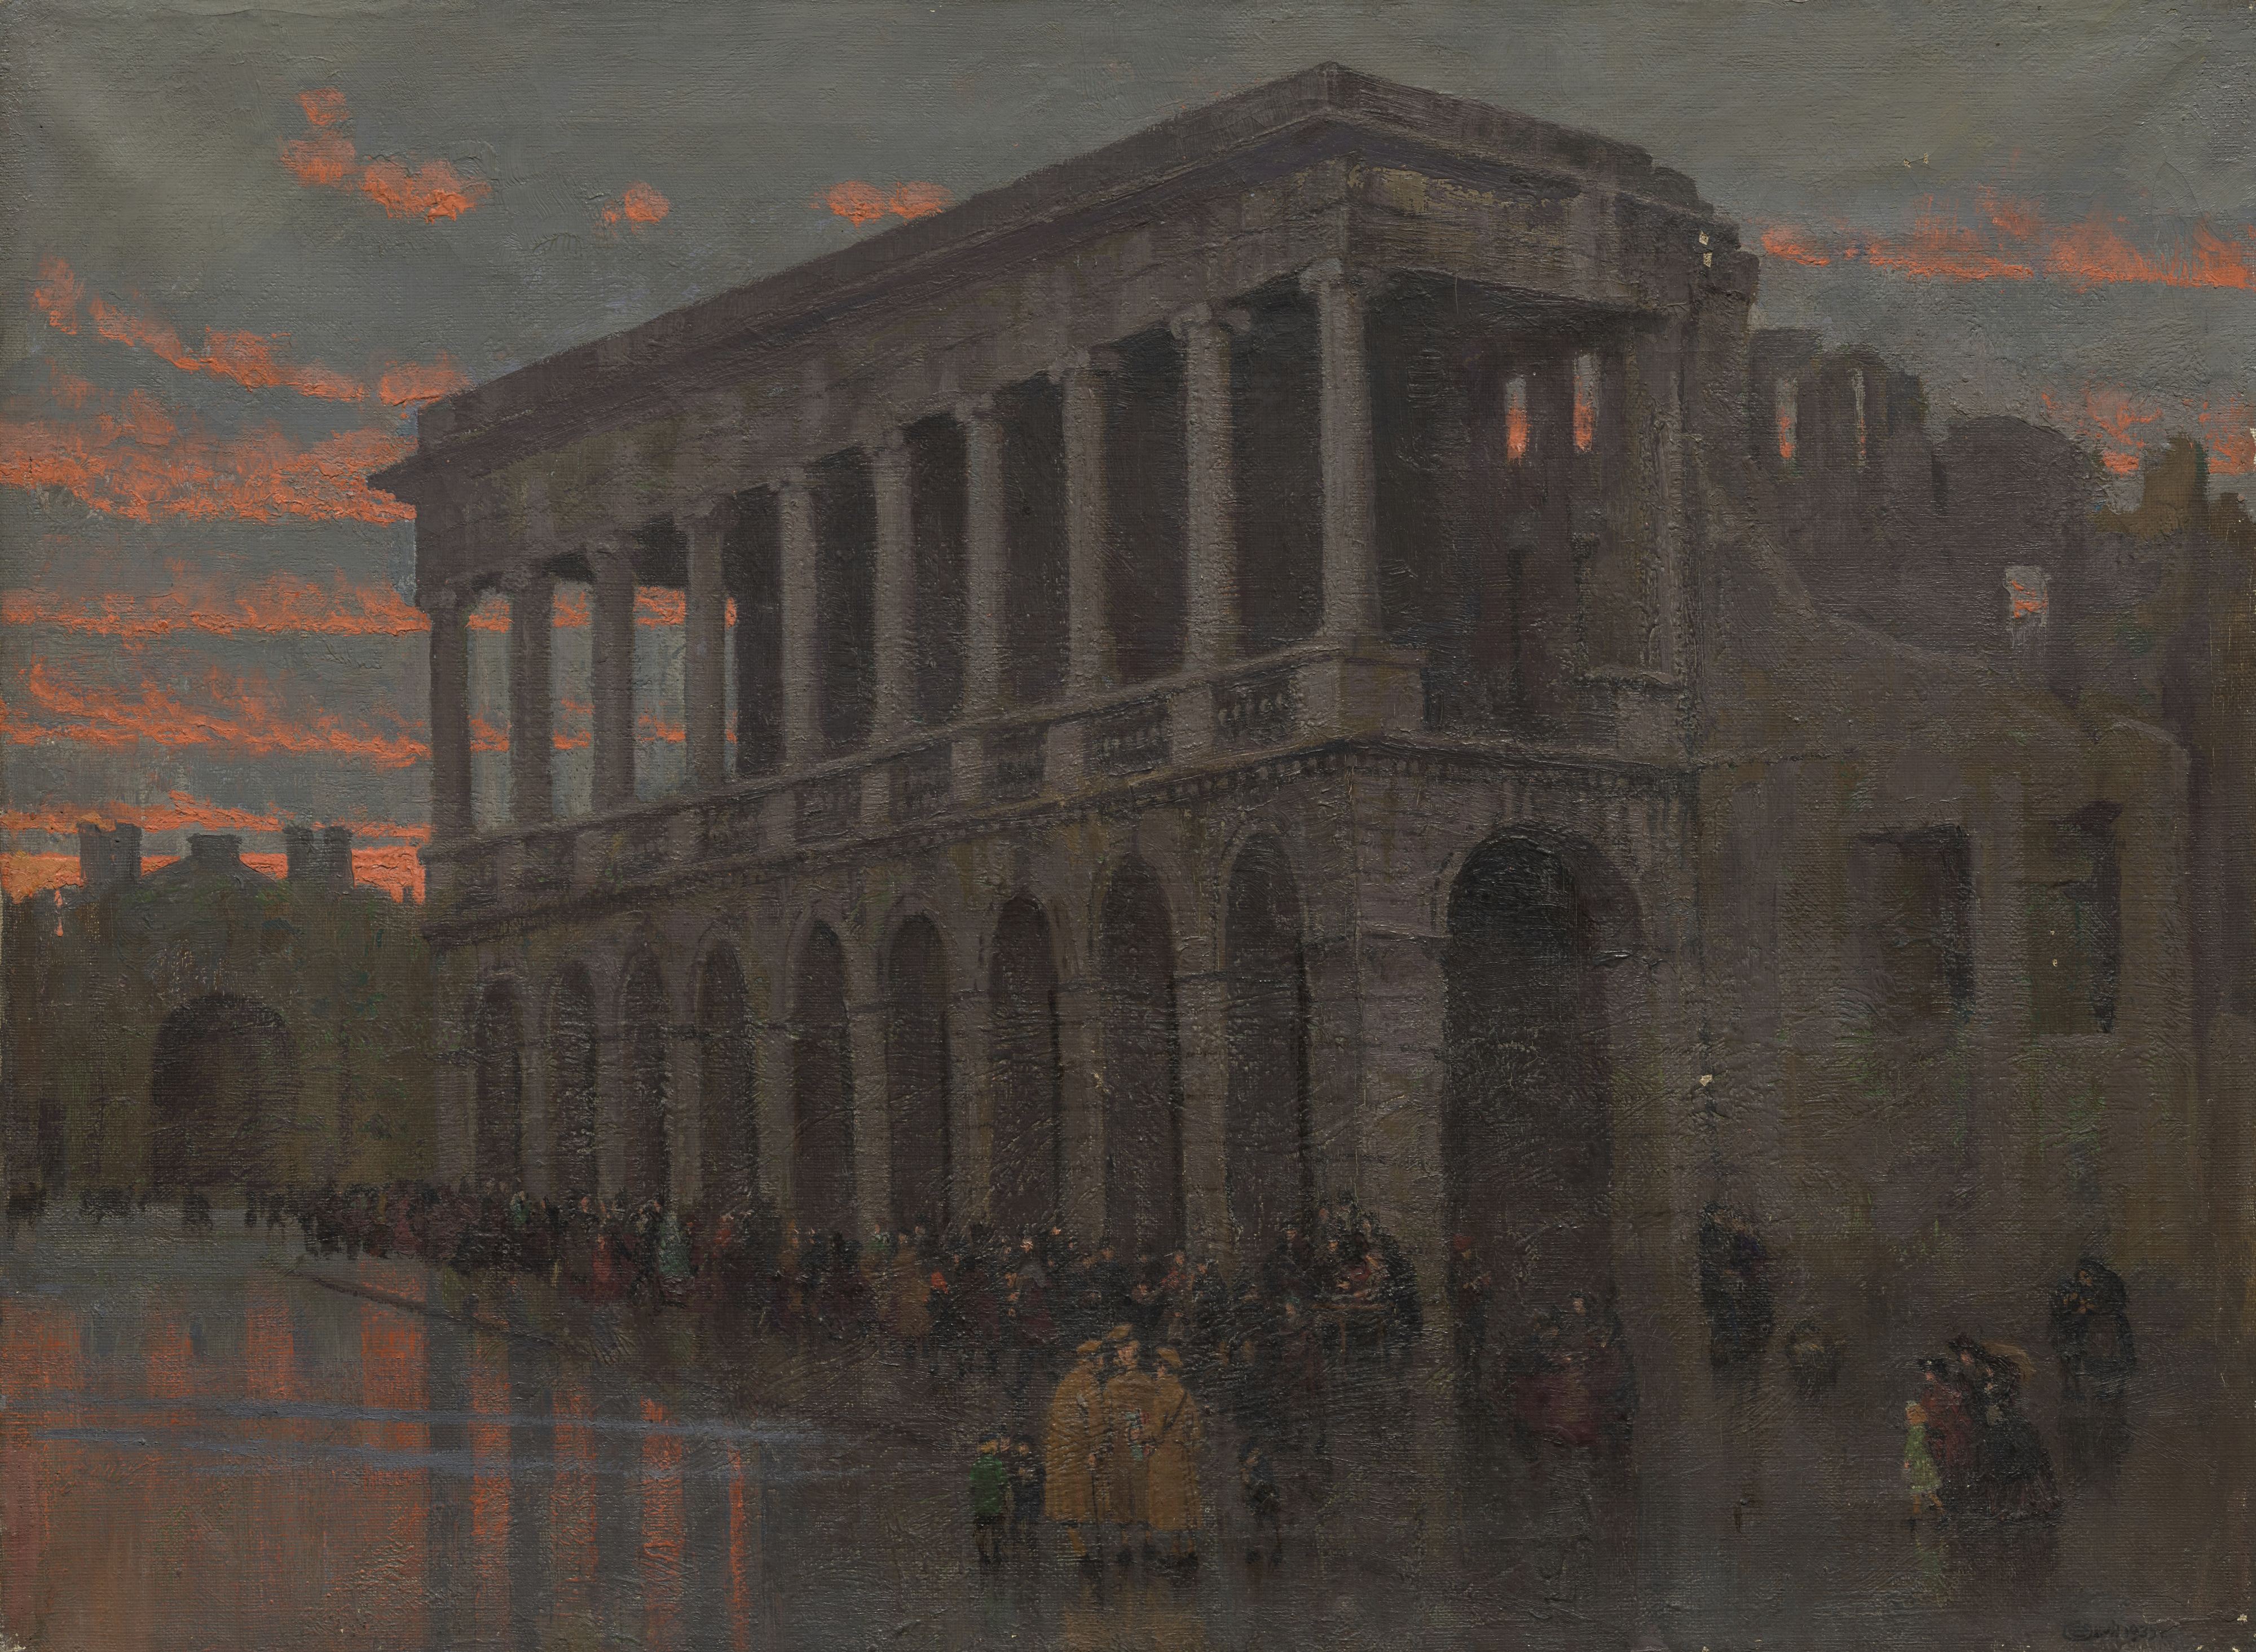 Ruins of the Lubomirski Palace on Iron Gate Square in Warsaw by Edward Okuń - 1939 - 46 x 62 cm Museum of Warsaw